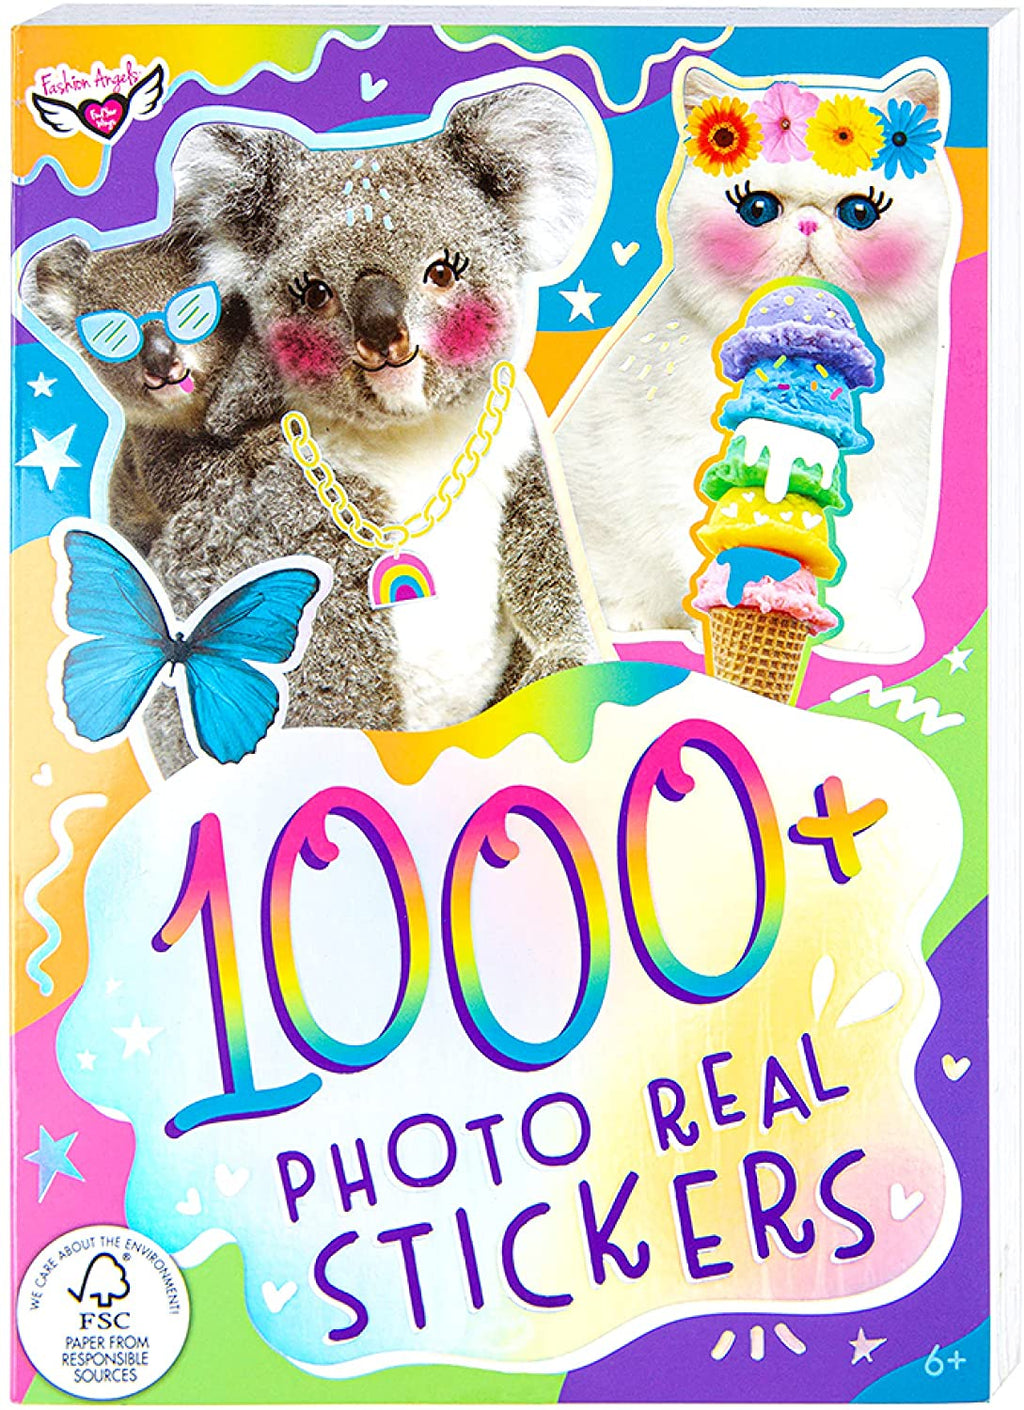 Fashion Angels 1000+ Photo Real Stickers